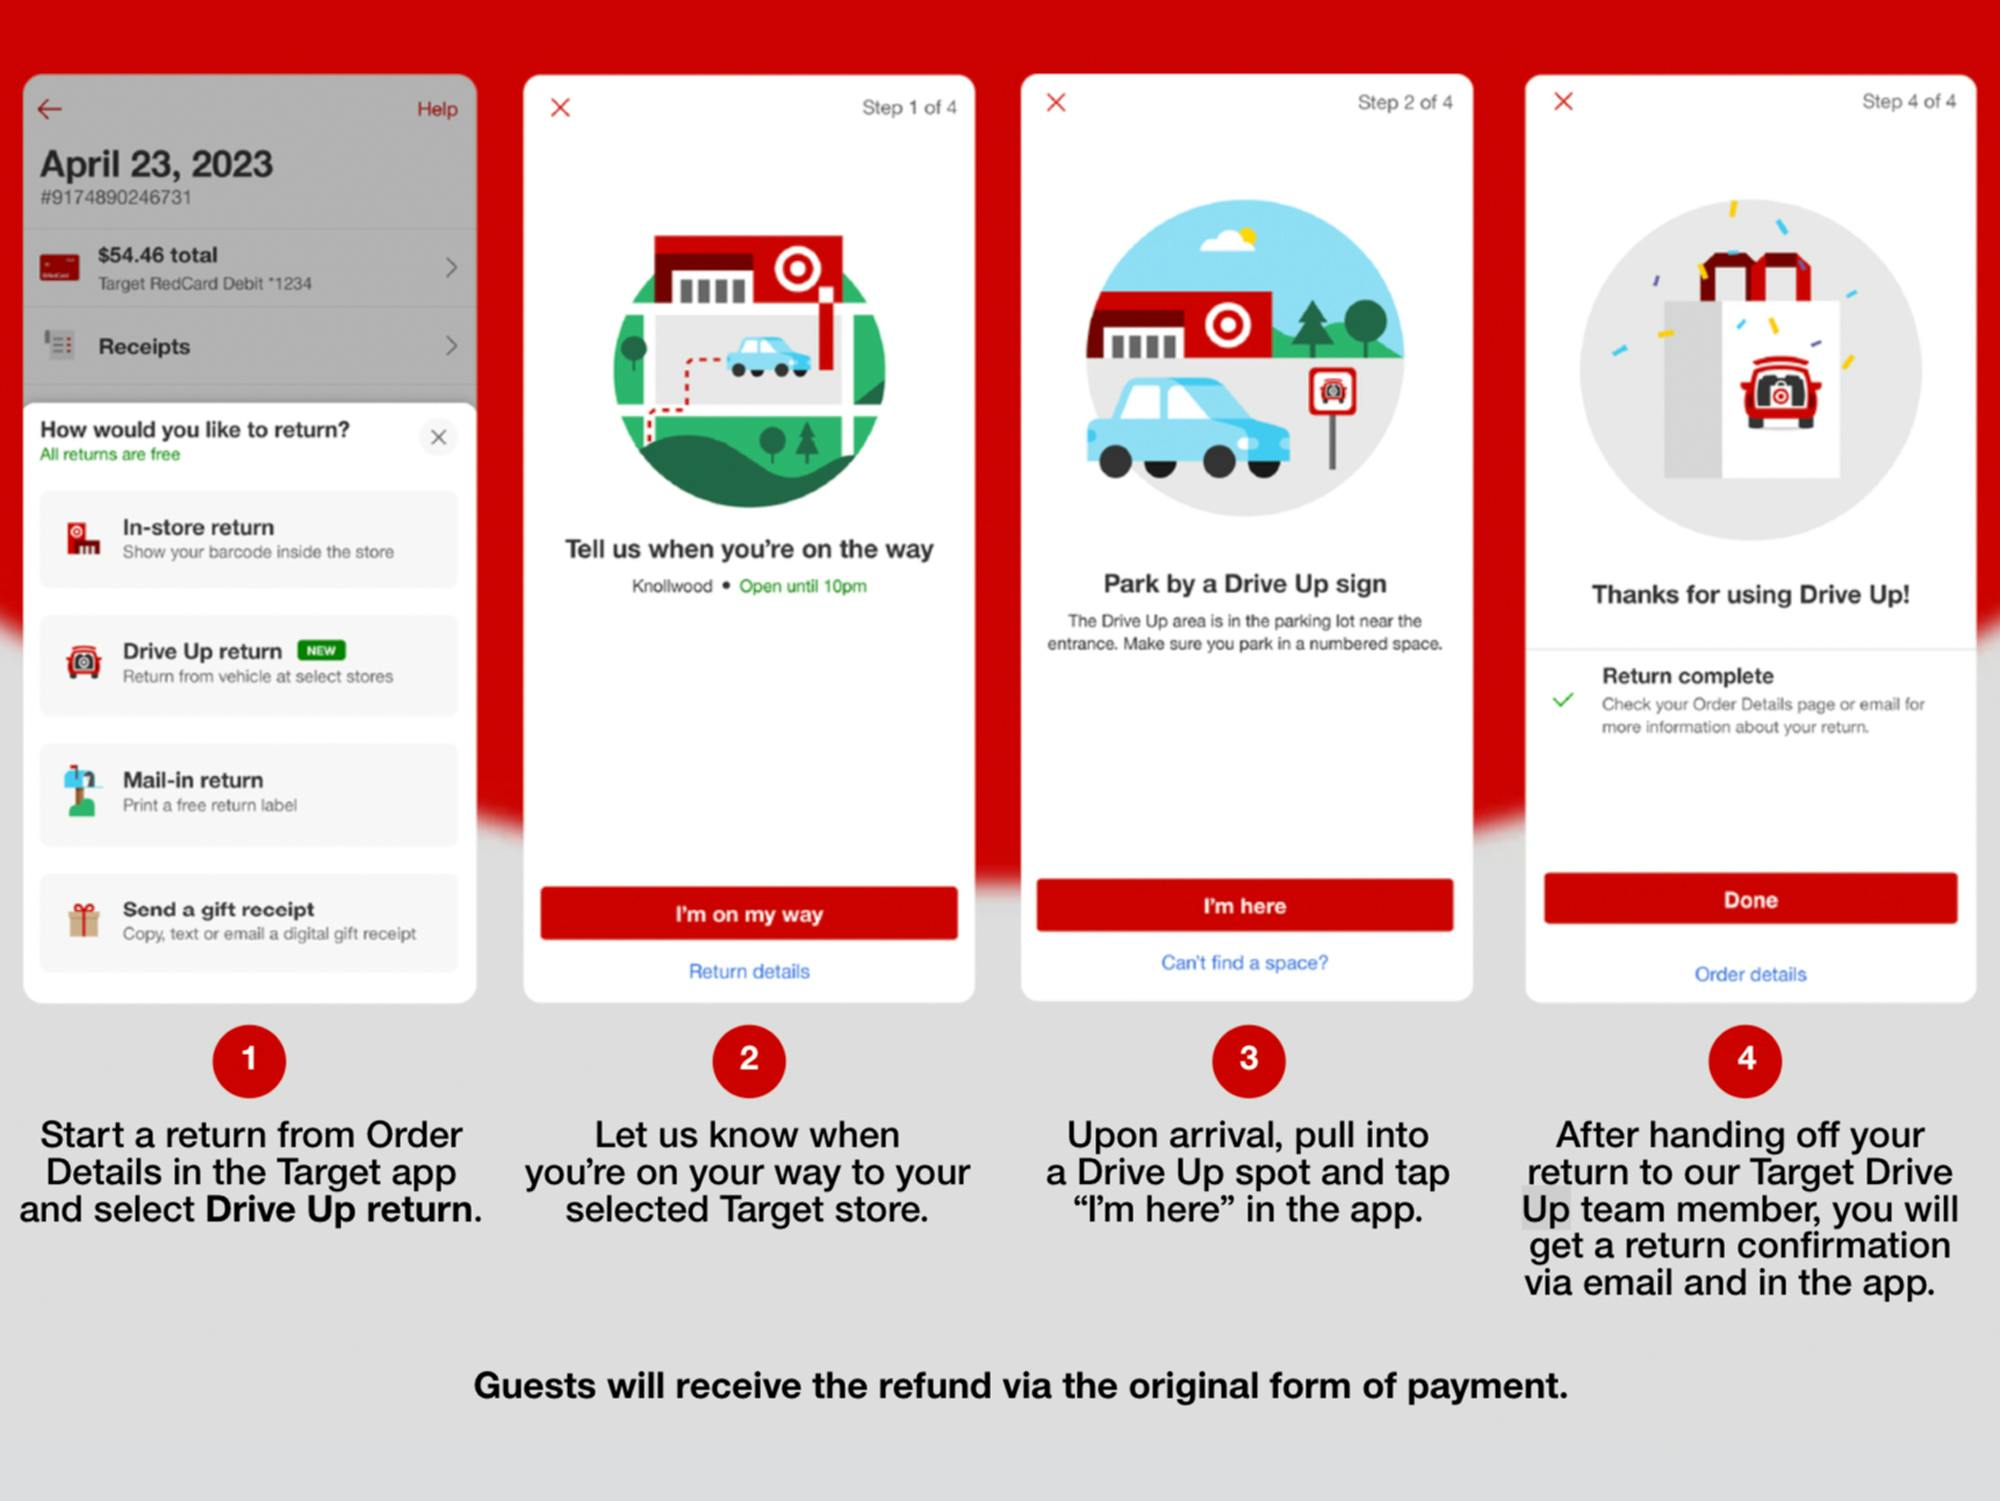 Screenshots of how the Target drive up returns process works via the Target app